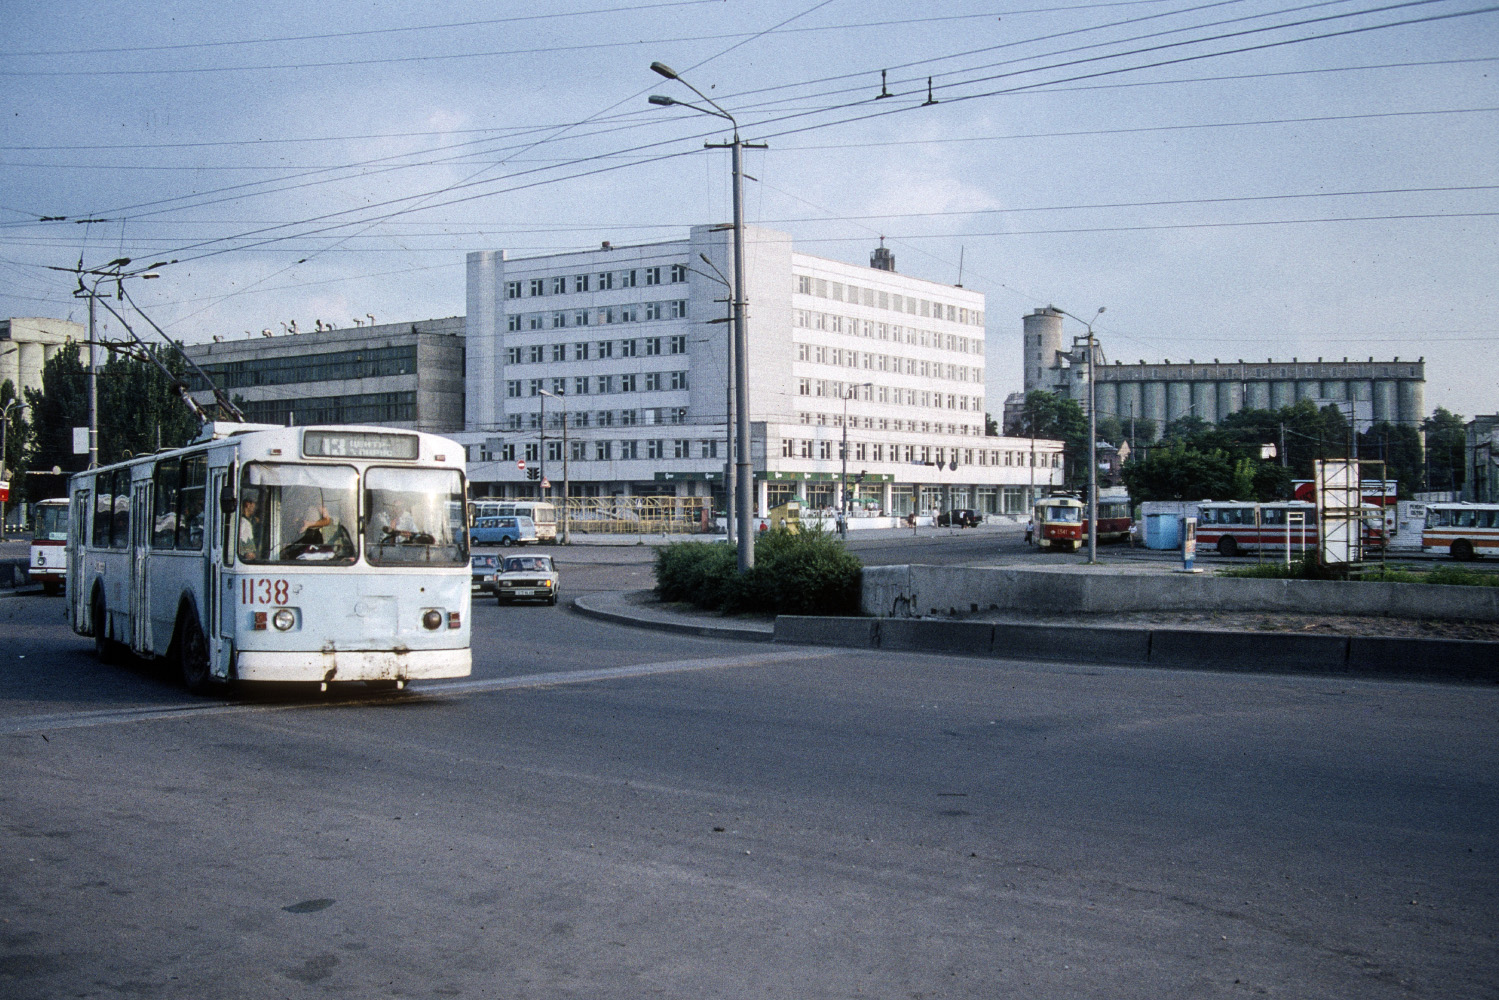 Dnipro, ZiU-682G [G00] № 1138; Dnipro — Old photos: Tram; Dnipro — Old photos: Trolleybus